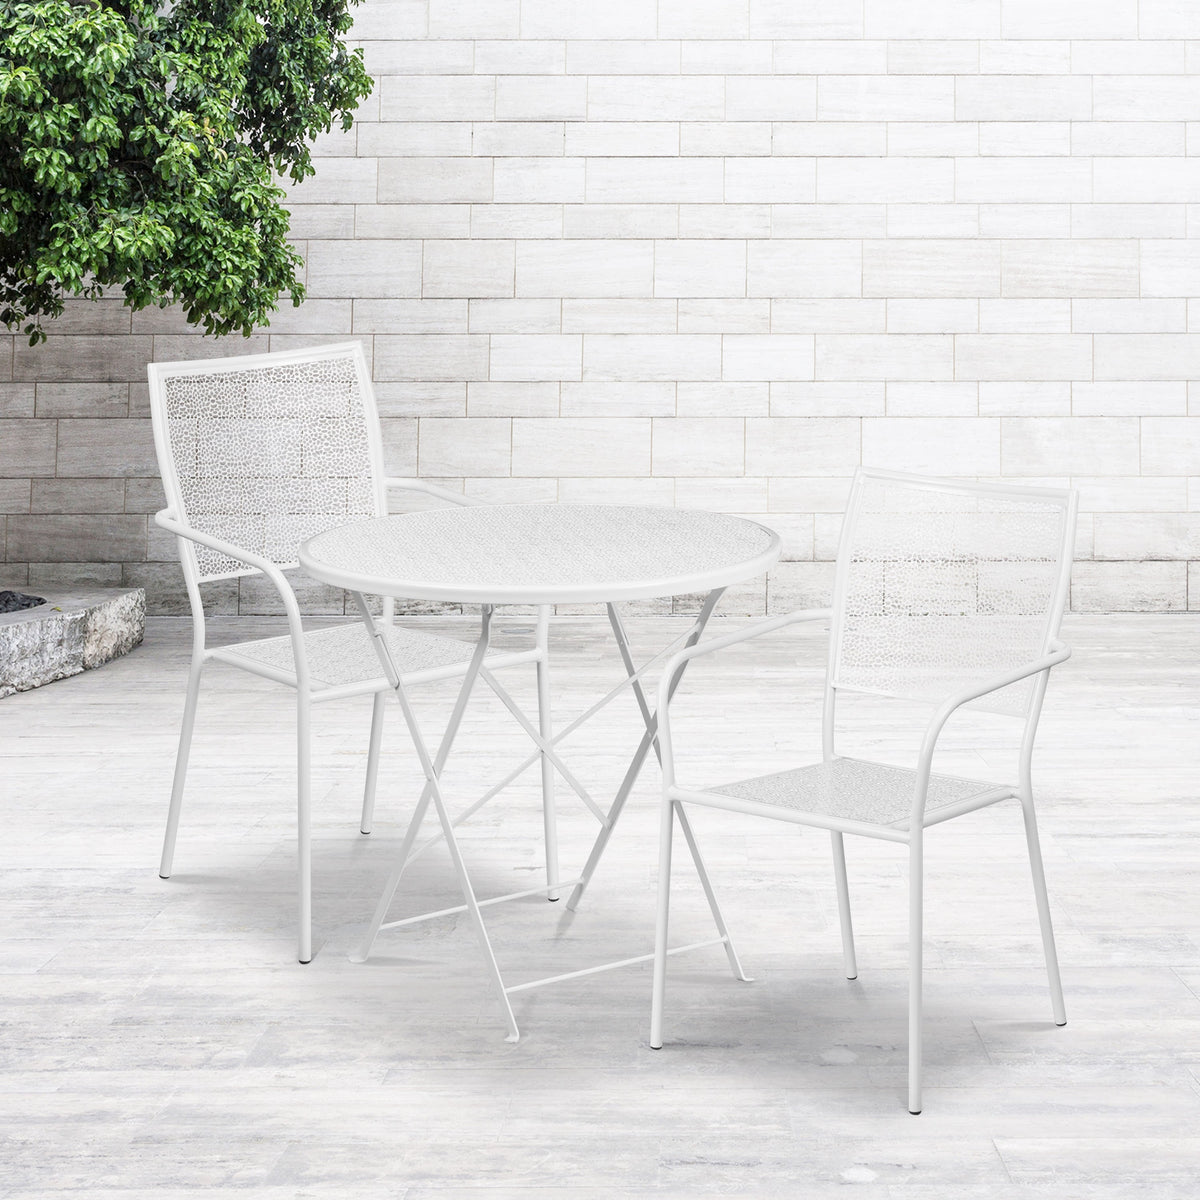 White |#| 30inch Round White Indoor-Outdoor Steel Folding Patio Table Set with 2 Chairs